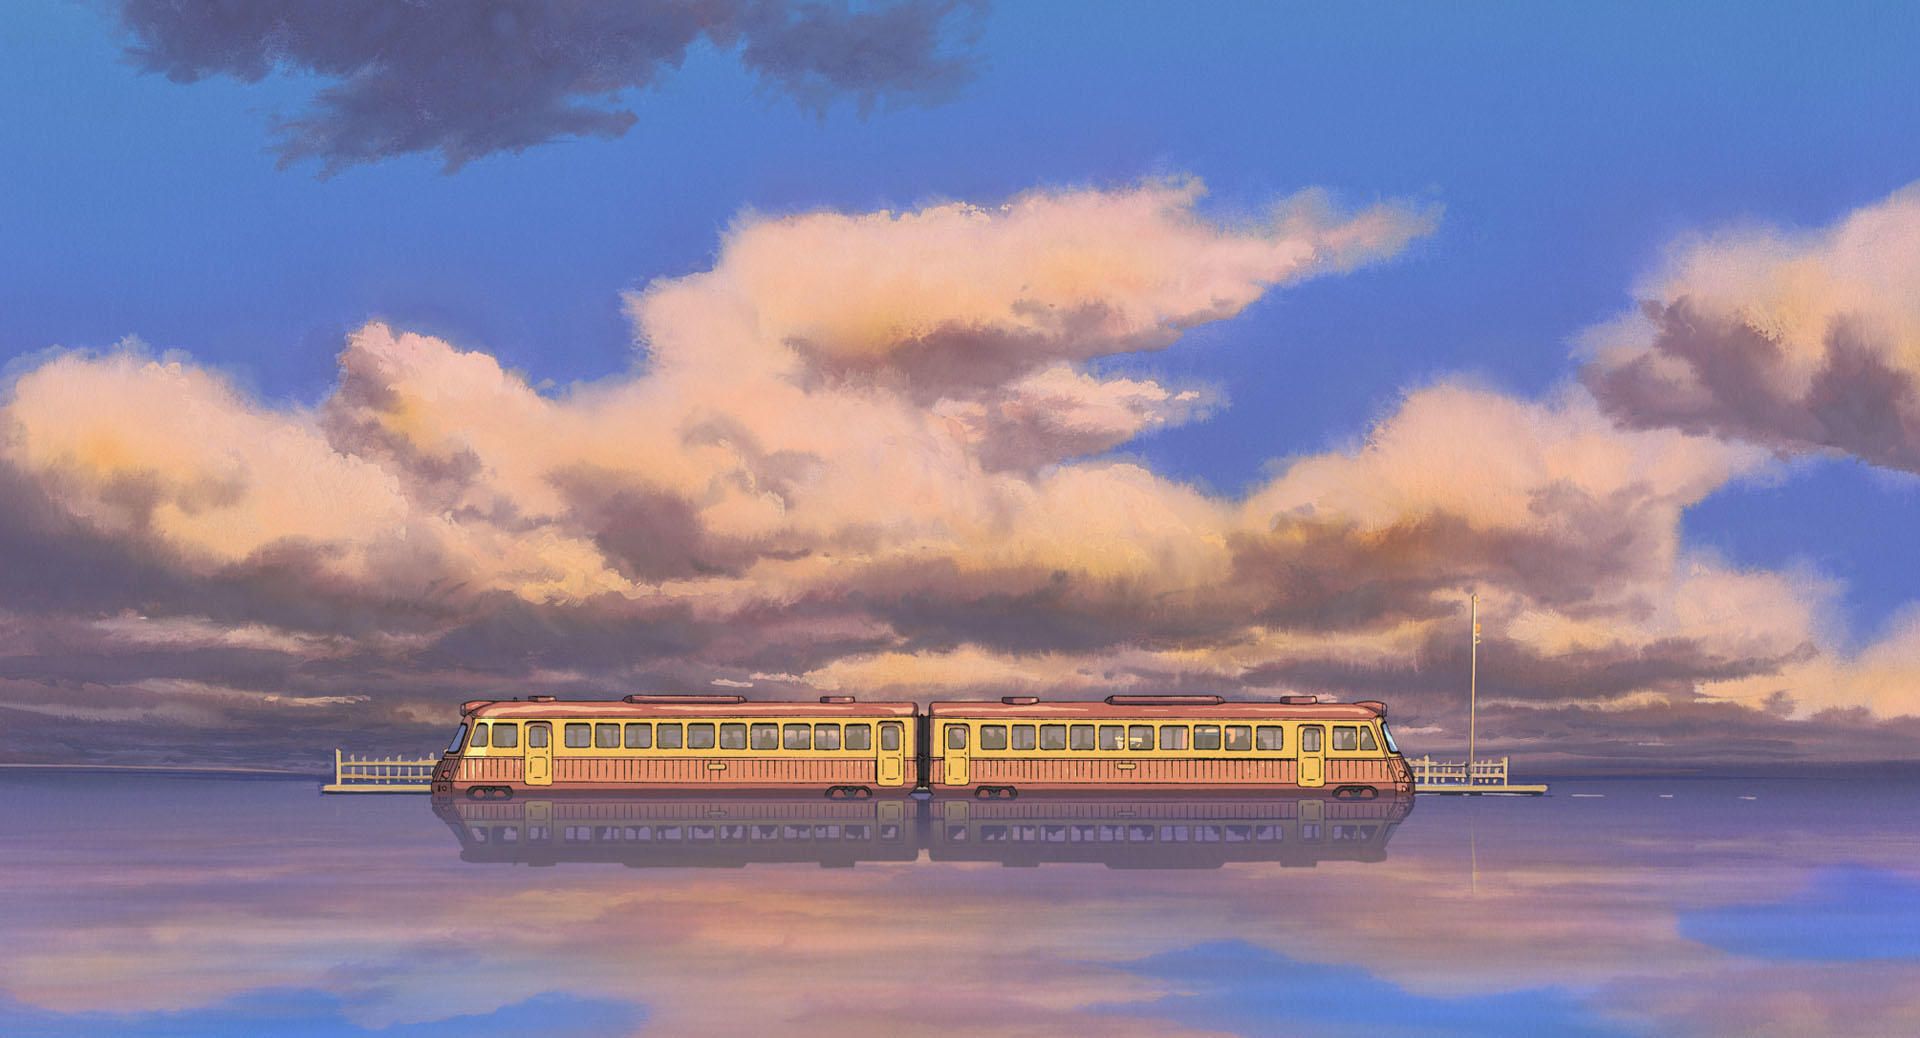 Studio Ghibli releases 400 free image from its best films including 'Spirited Away'